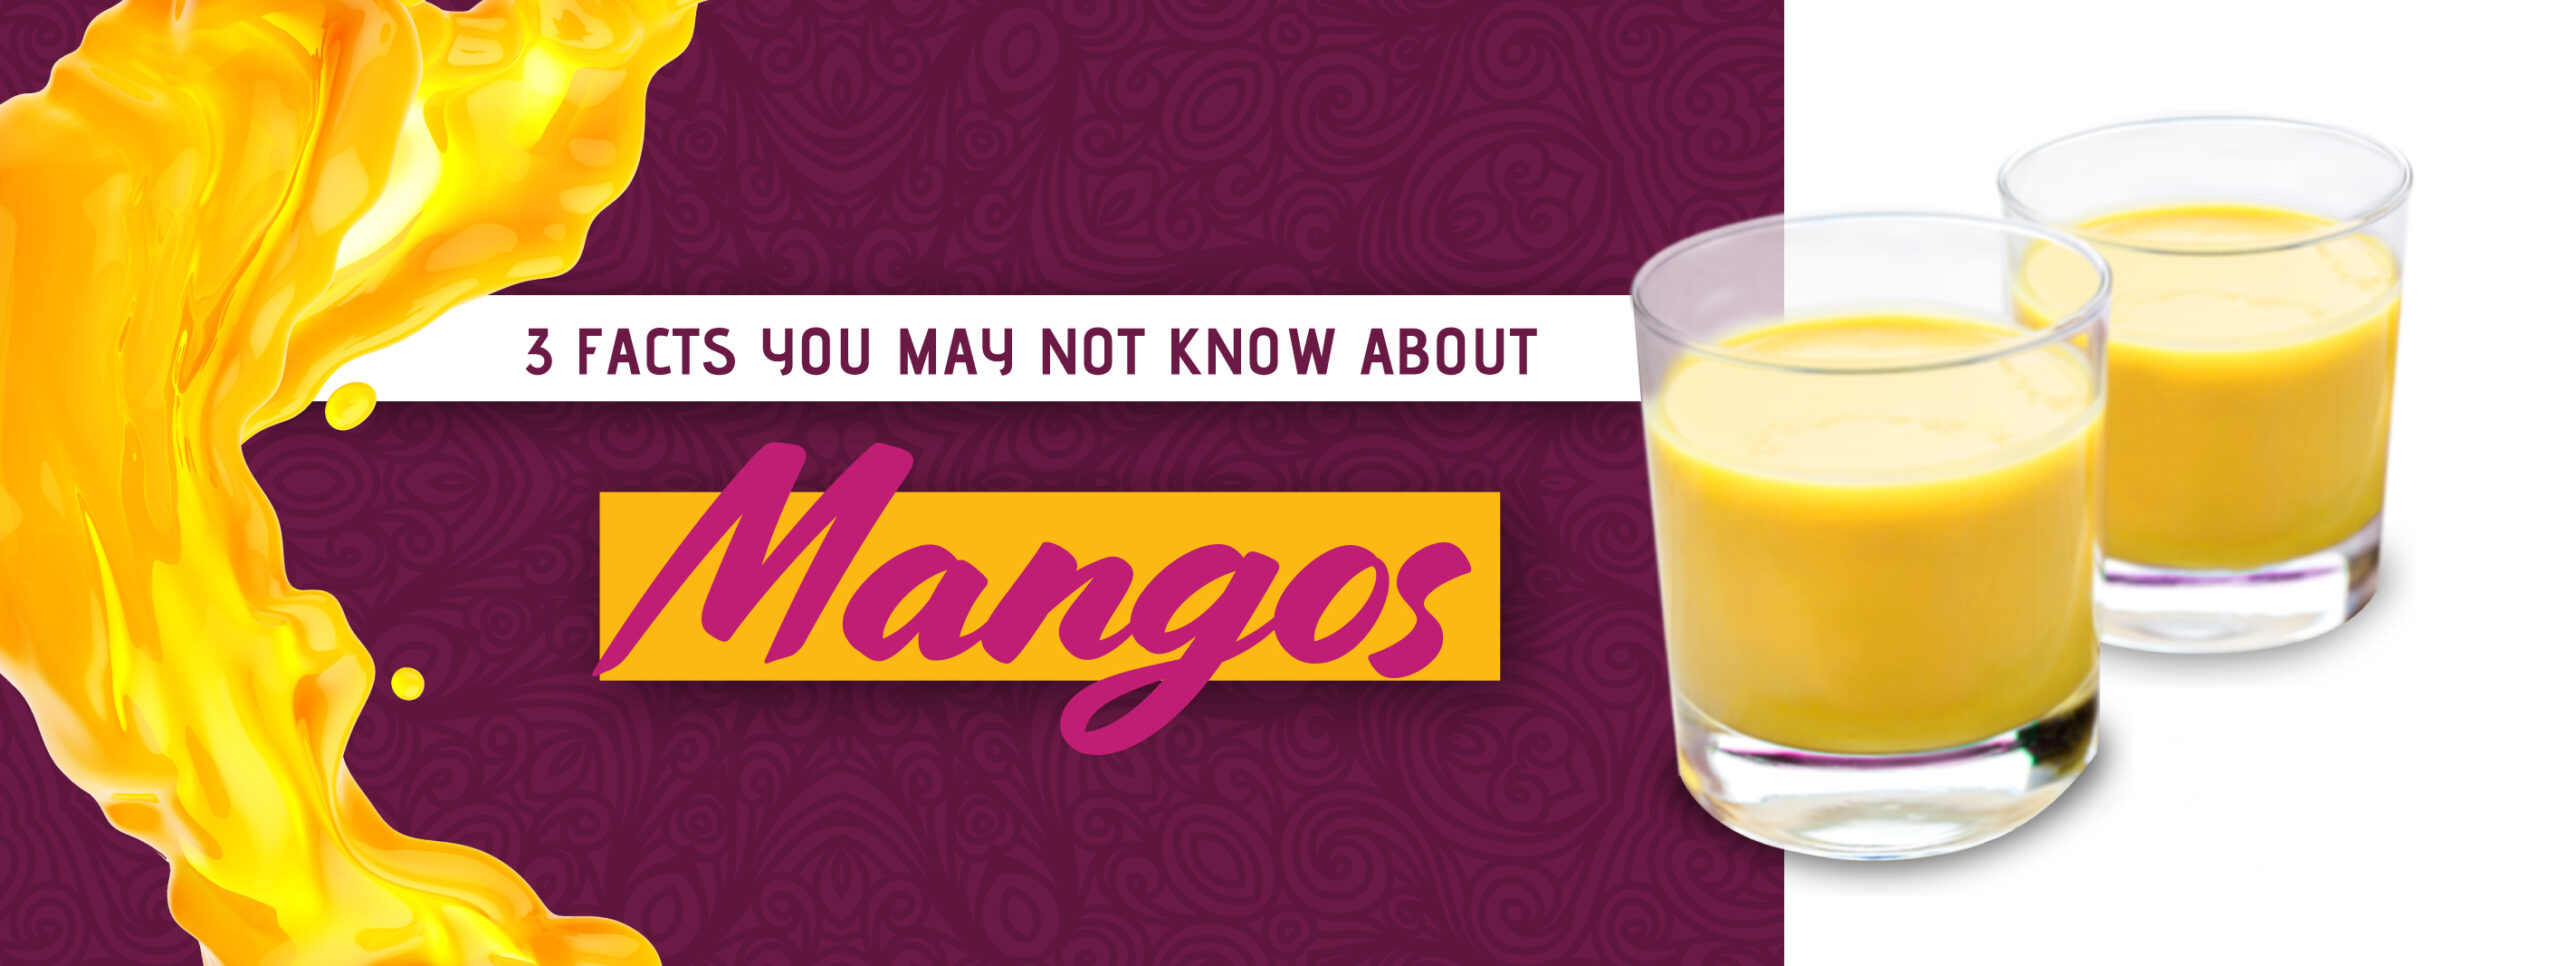 3 Facts You May Not Know About Mangoes